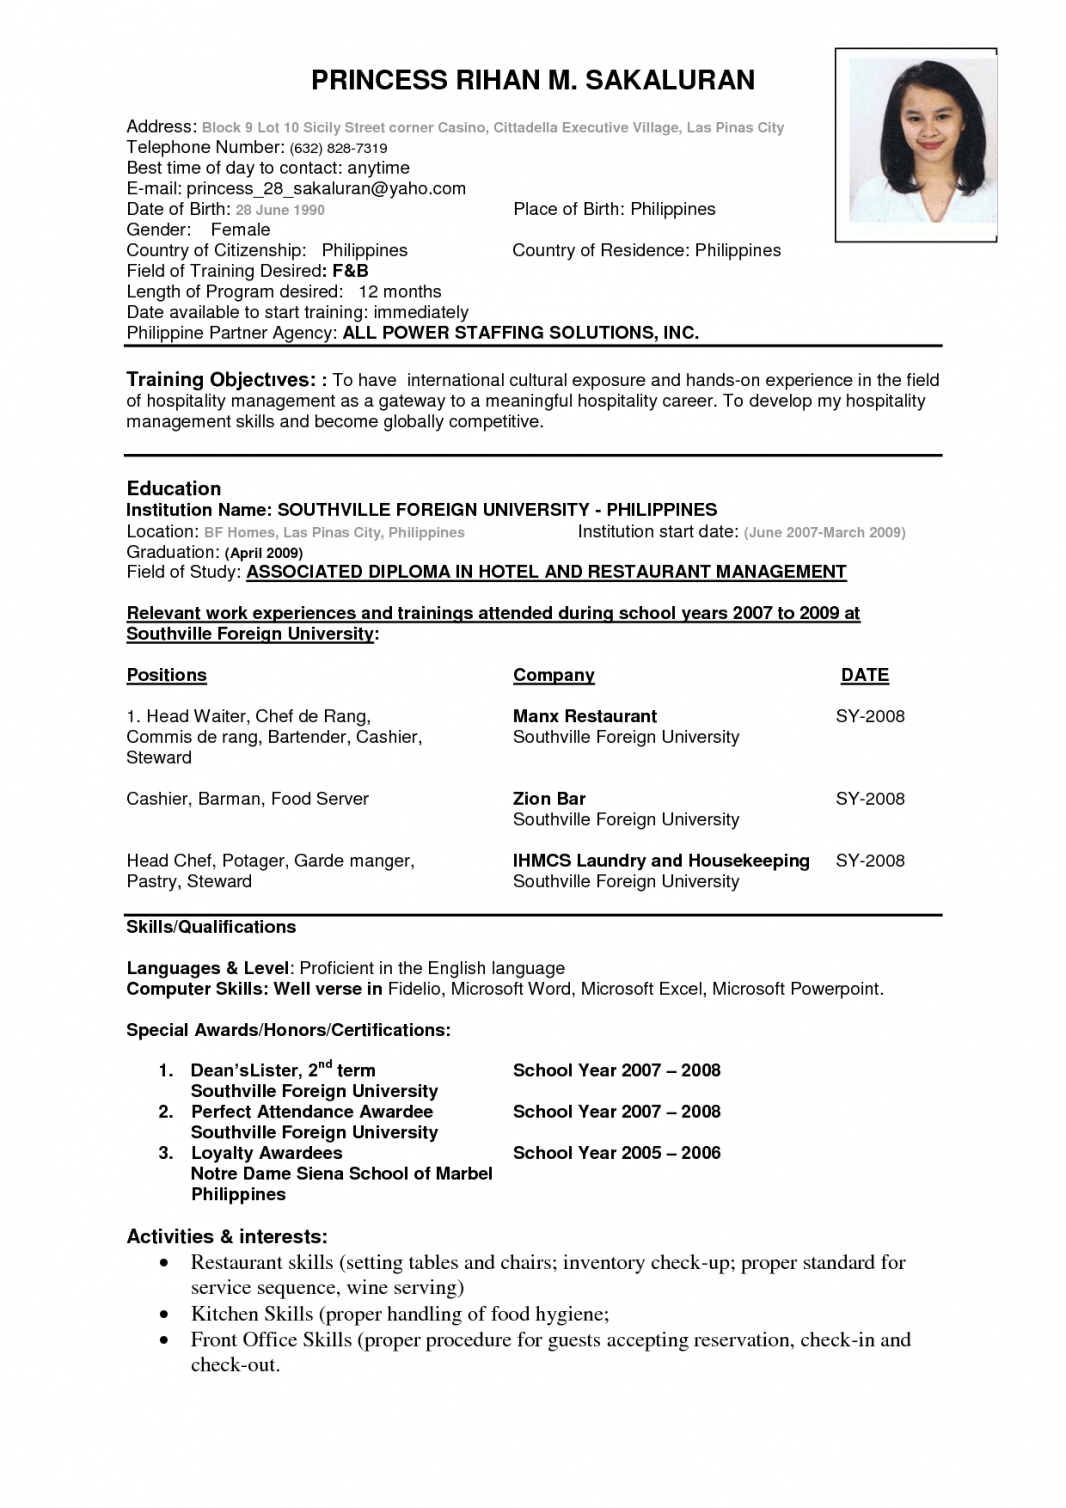 Resume Format For Experienced Professional  